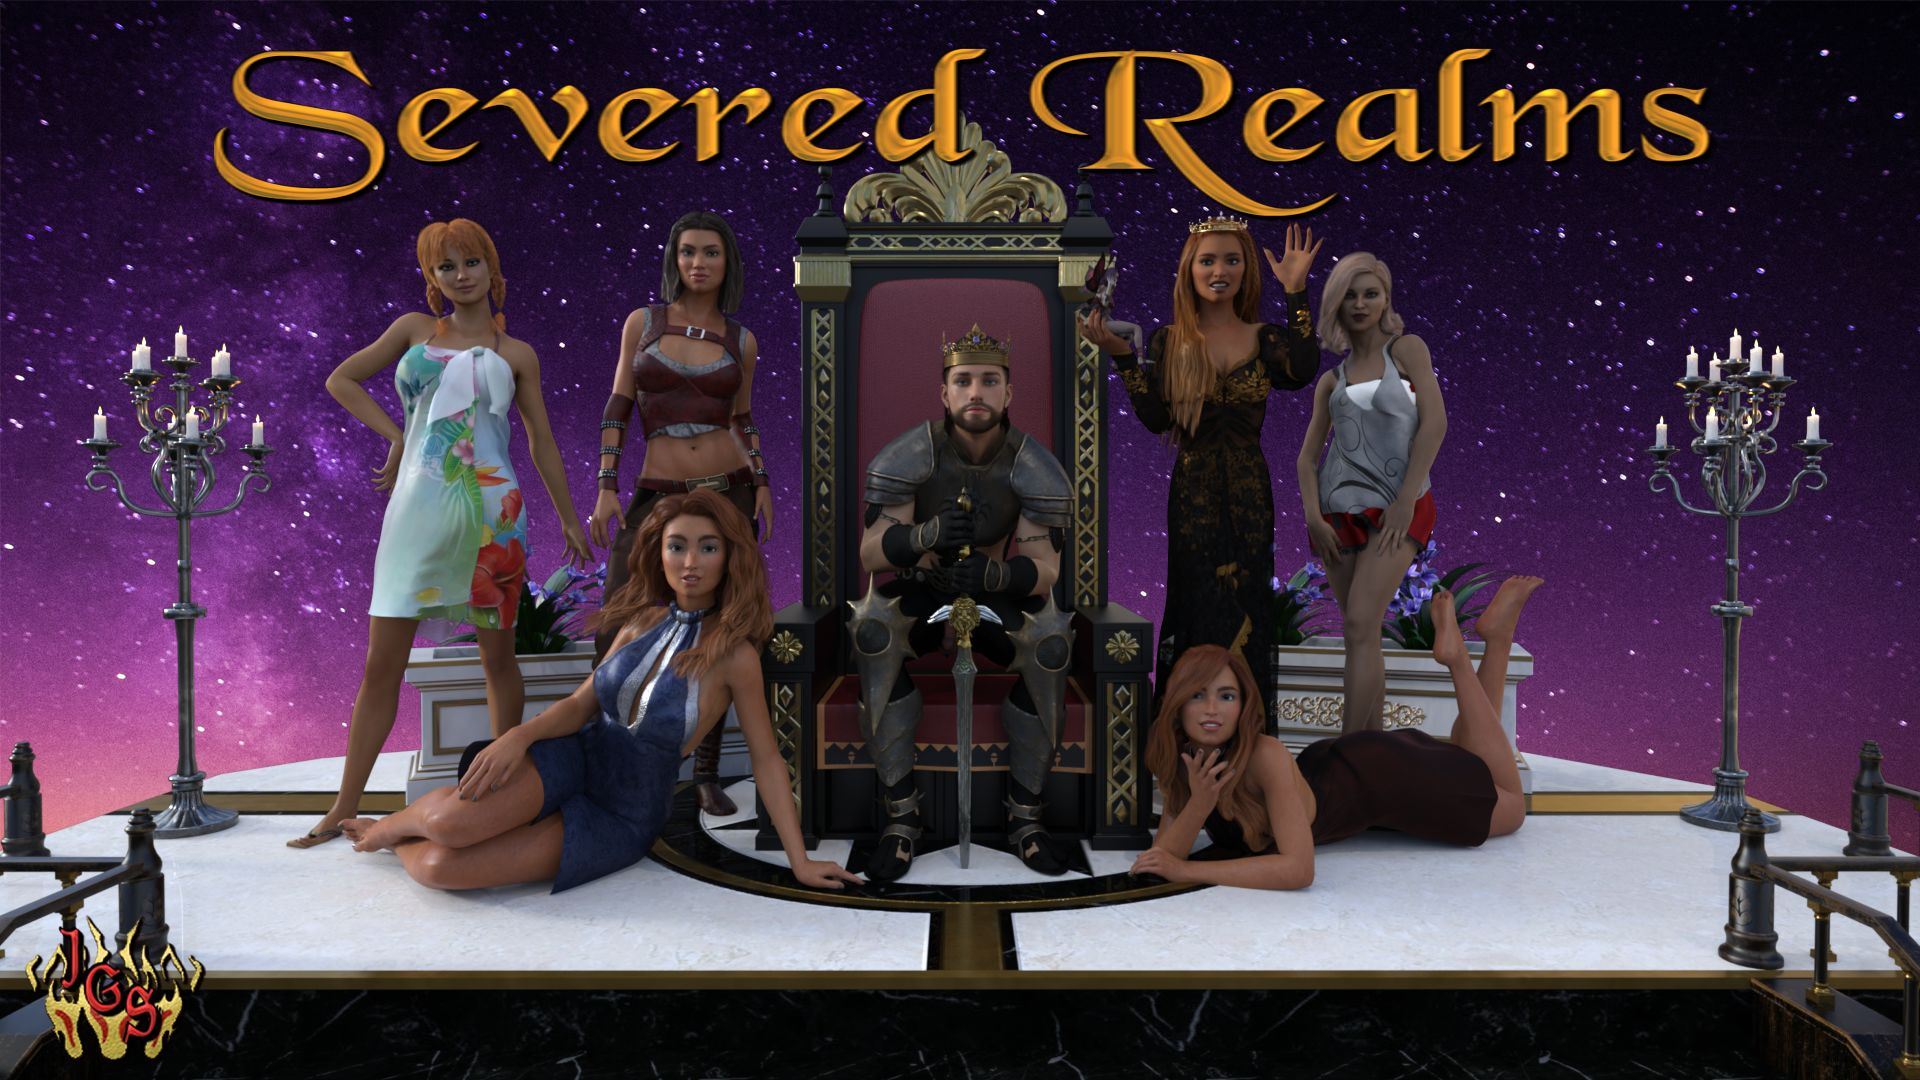 Www Seyx Xxxx Download Com - Severed Realms Ren'Py Porn Sex Game v.0.0.7 Download for Windows, MacOS,  Linux, Android